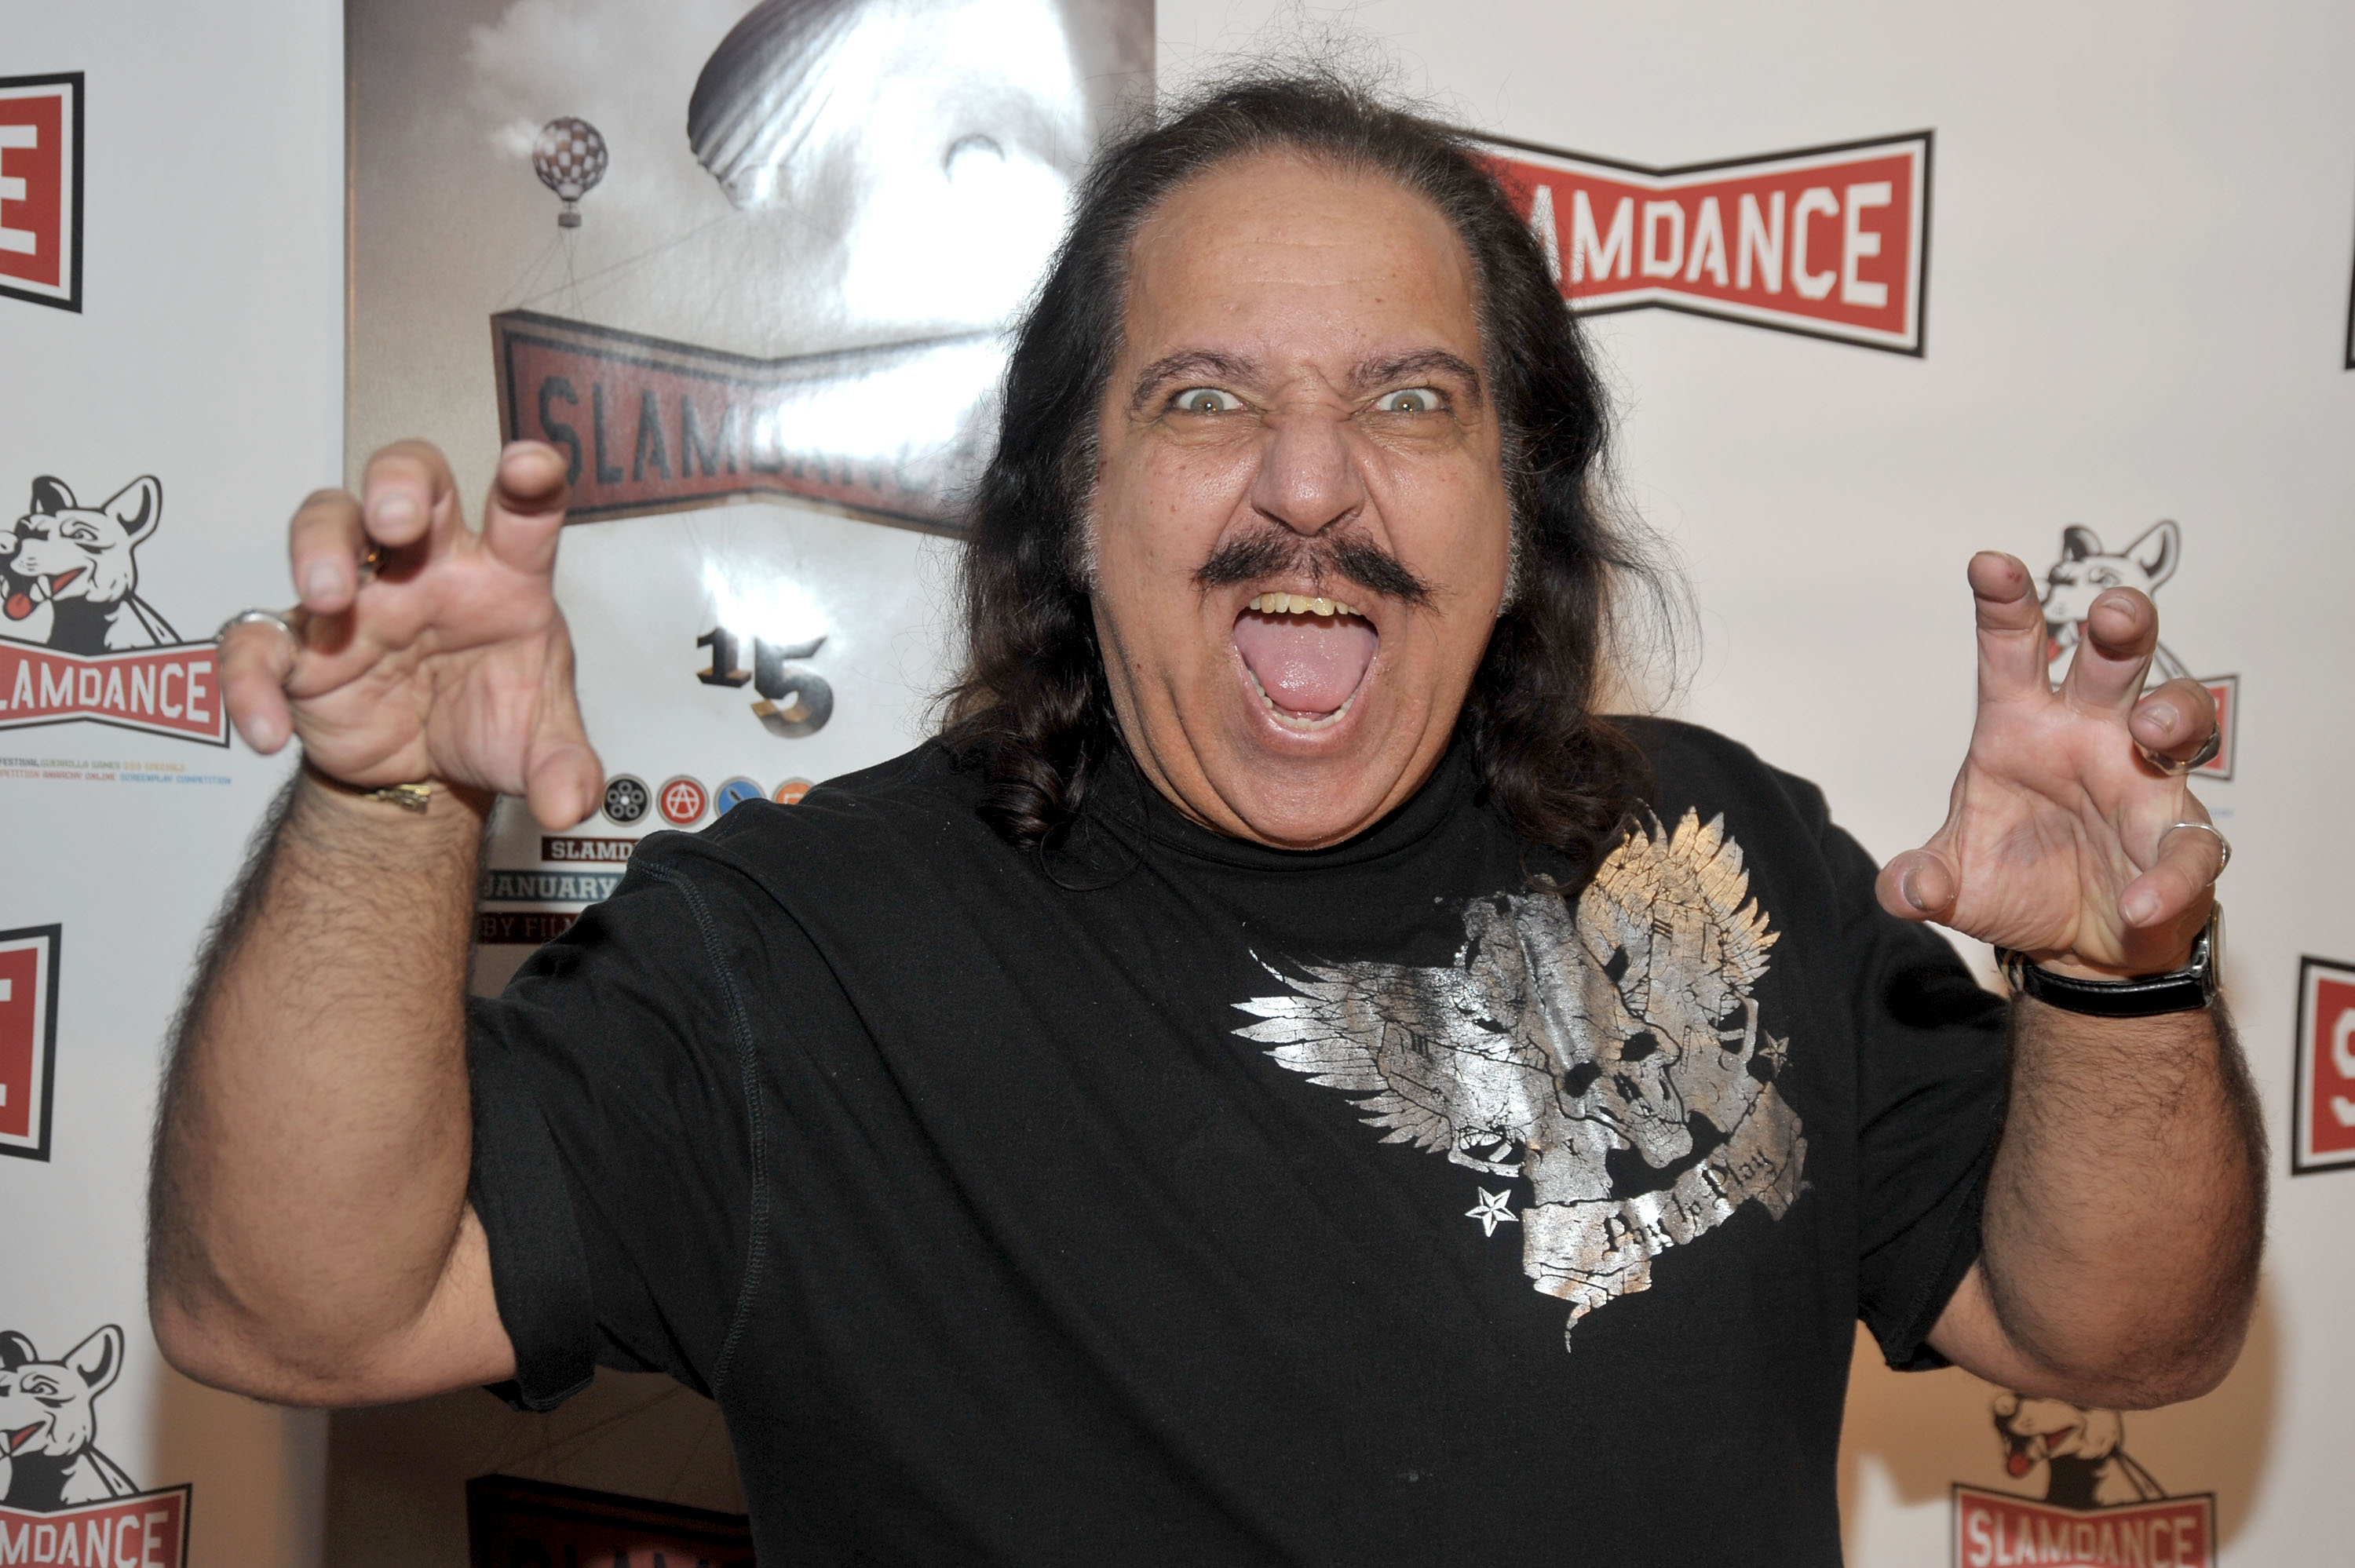 PARK CITY, UT - JANUARY 18: Actor Ron Jeremy attends the premiere of 'Finding Bliss' held at the Treasure Mountain Inn during the 2009 Slamdance Film Festival on January 18, 2009 in Park City, Utah. (Photo by Frazer Harrison/Getty Images)